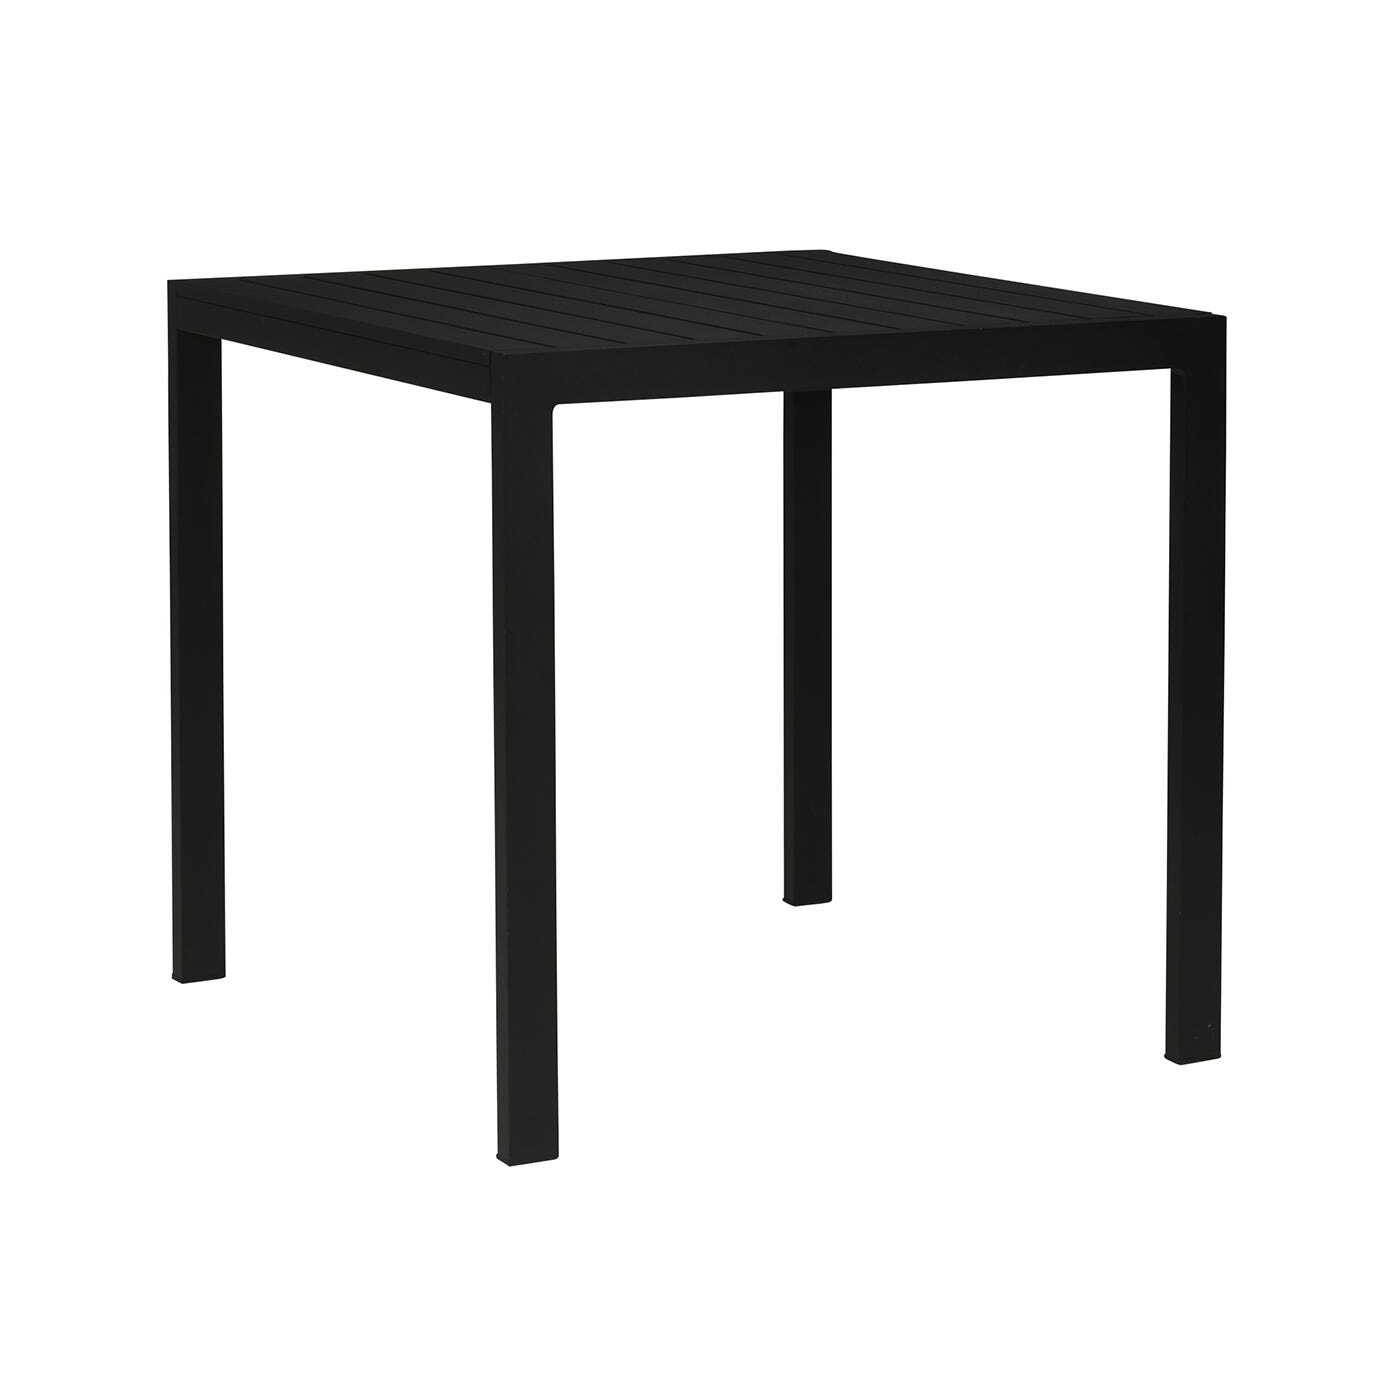 Case Eos Square Outdoor Dining Table Black - image 1